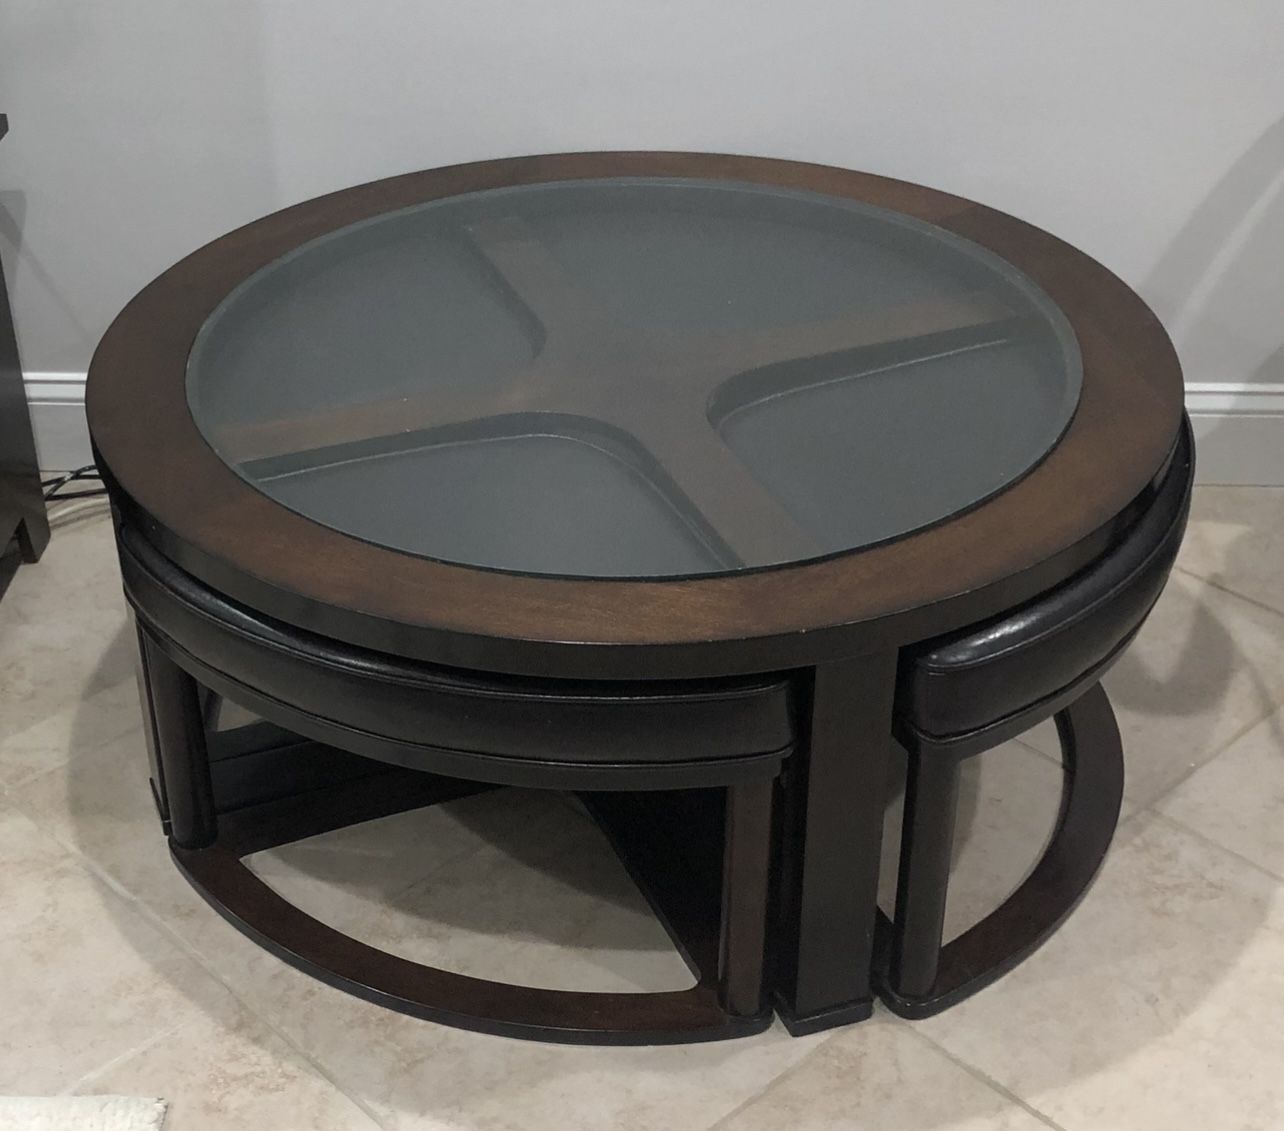 Espresso Solid Wood Glass Top Round Coffee Table with 4 Stools